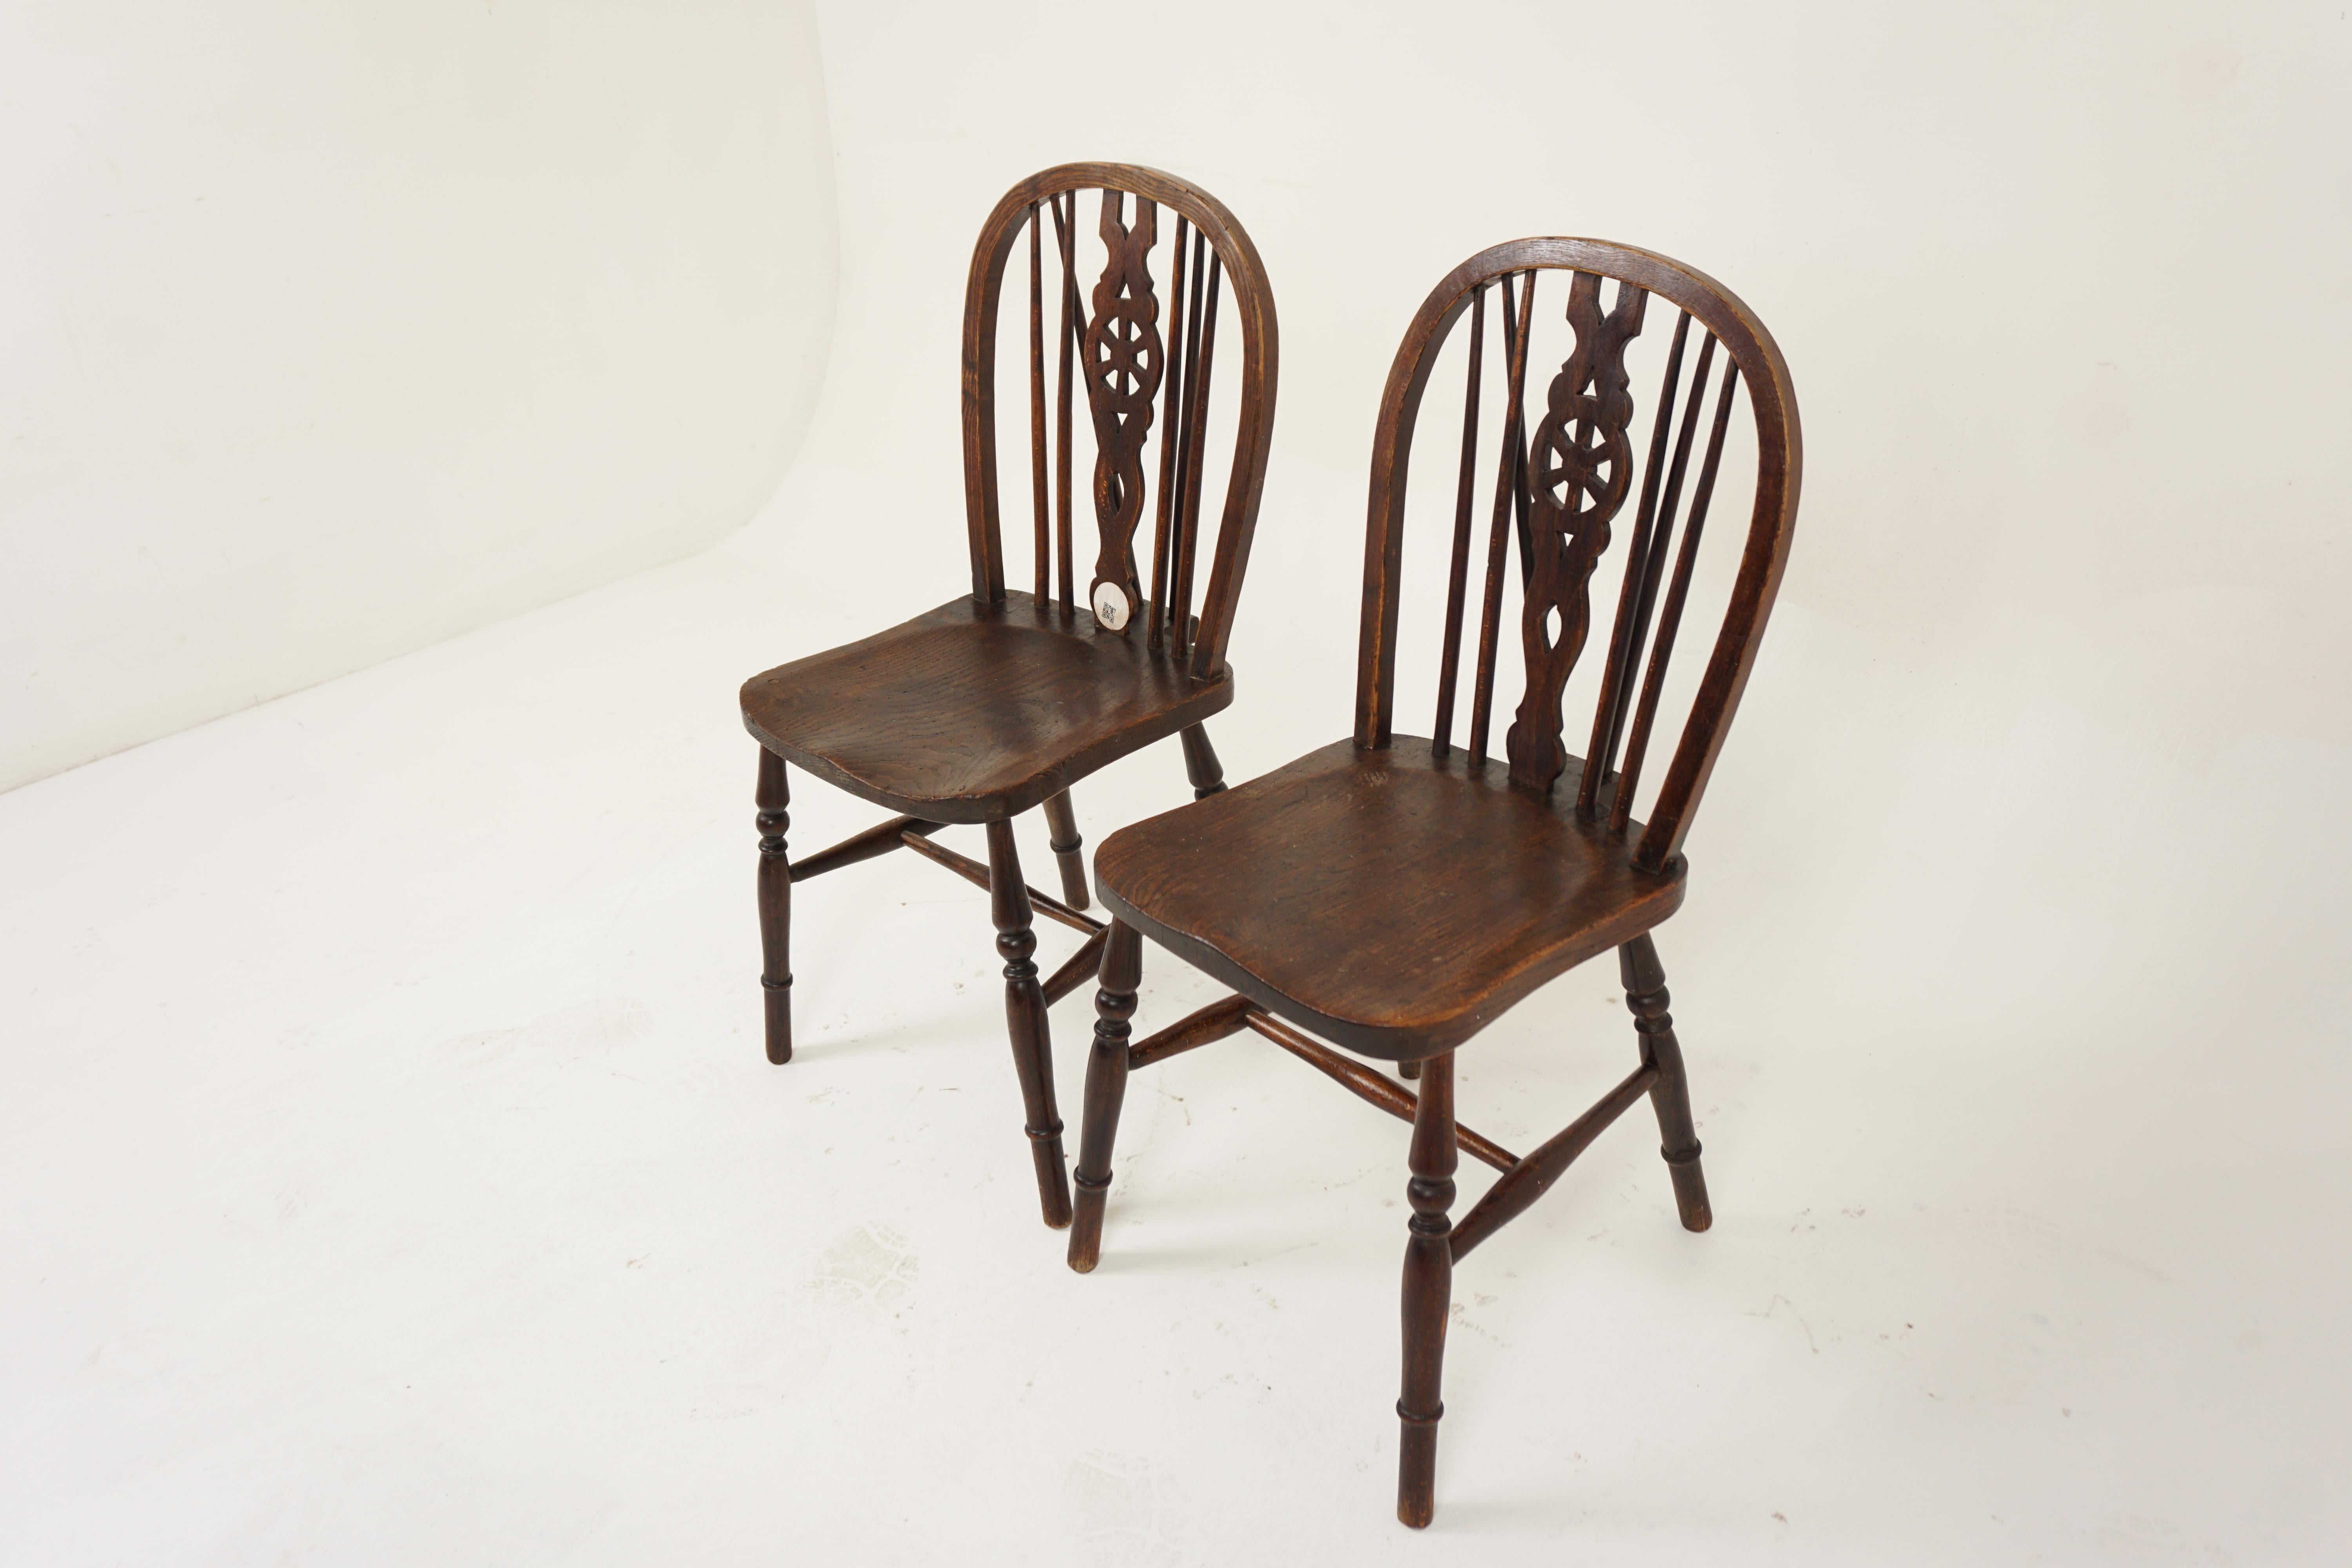 Pair Of Vintage Elm Wheelback Windsor Chairs, Scotland 1930, H1134

Scotland 1930
Solid Elm
Original finish
The chairs consist of a hoop back and central pierced splat
With wheeled design and turned spindles
Leading down to a solid elm